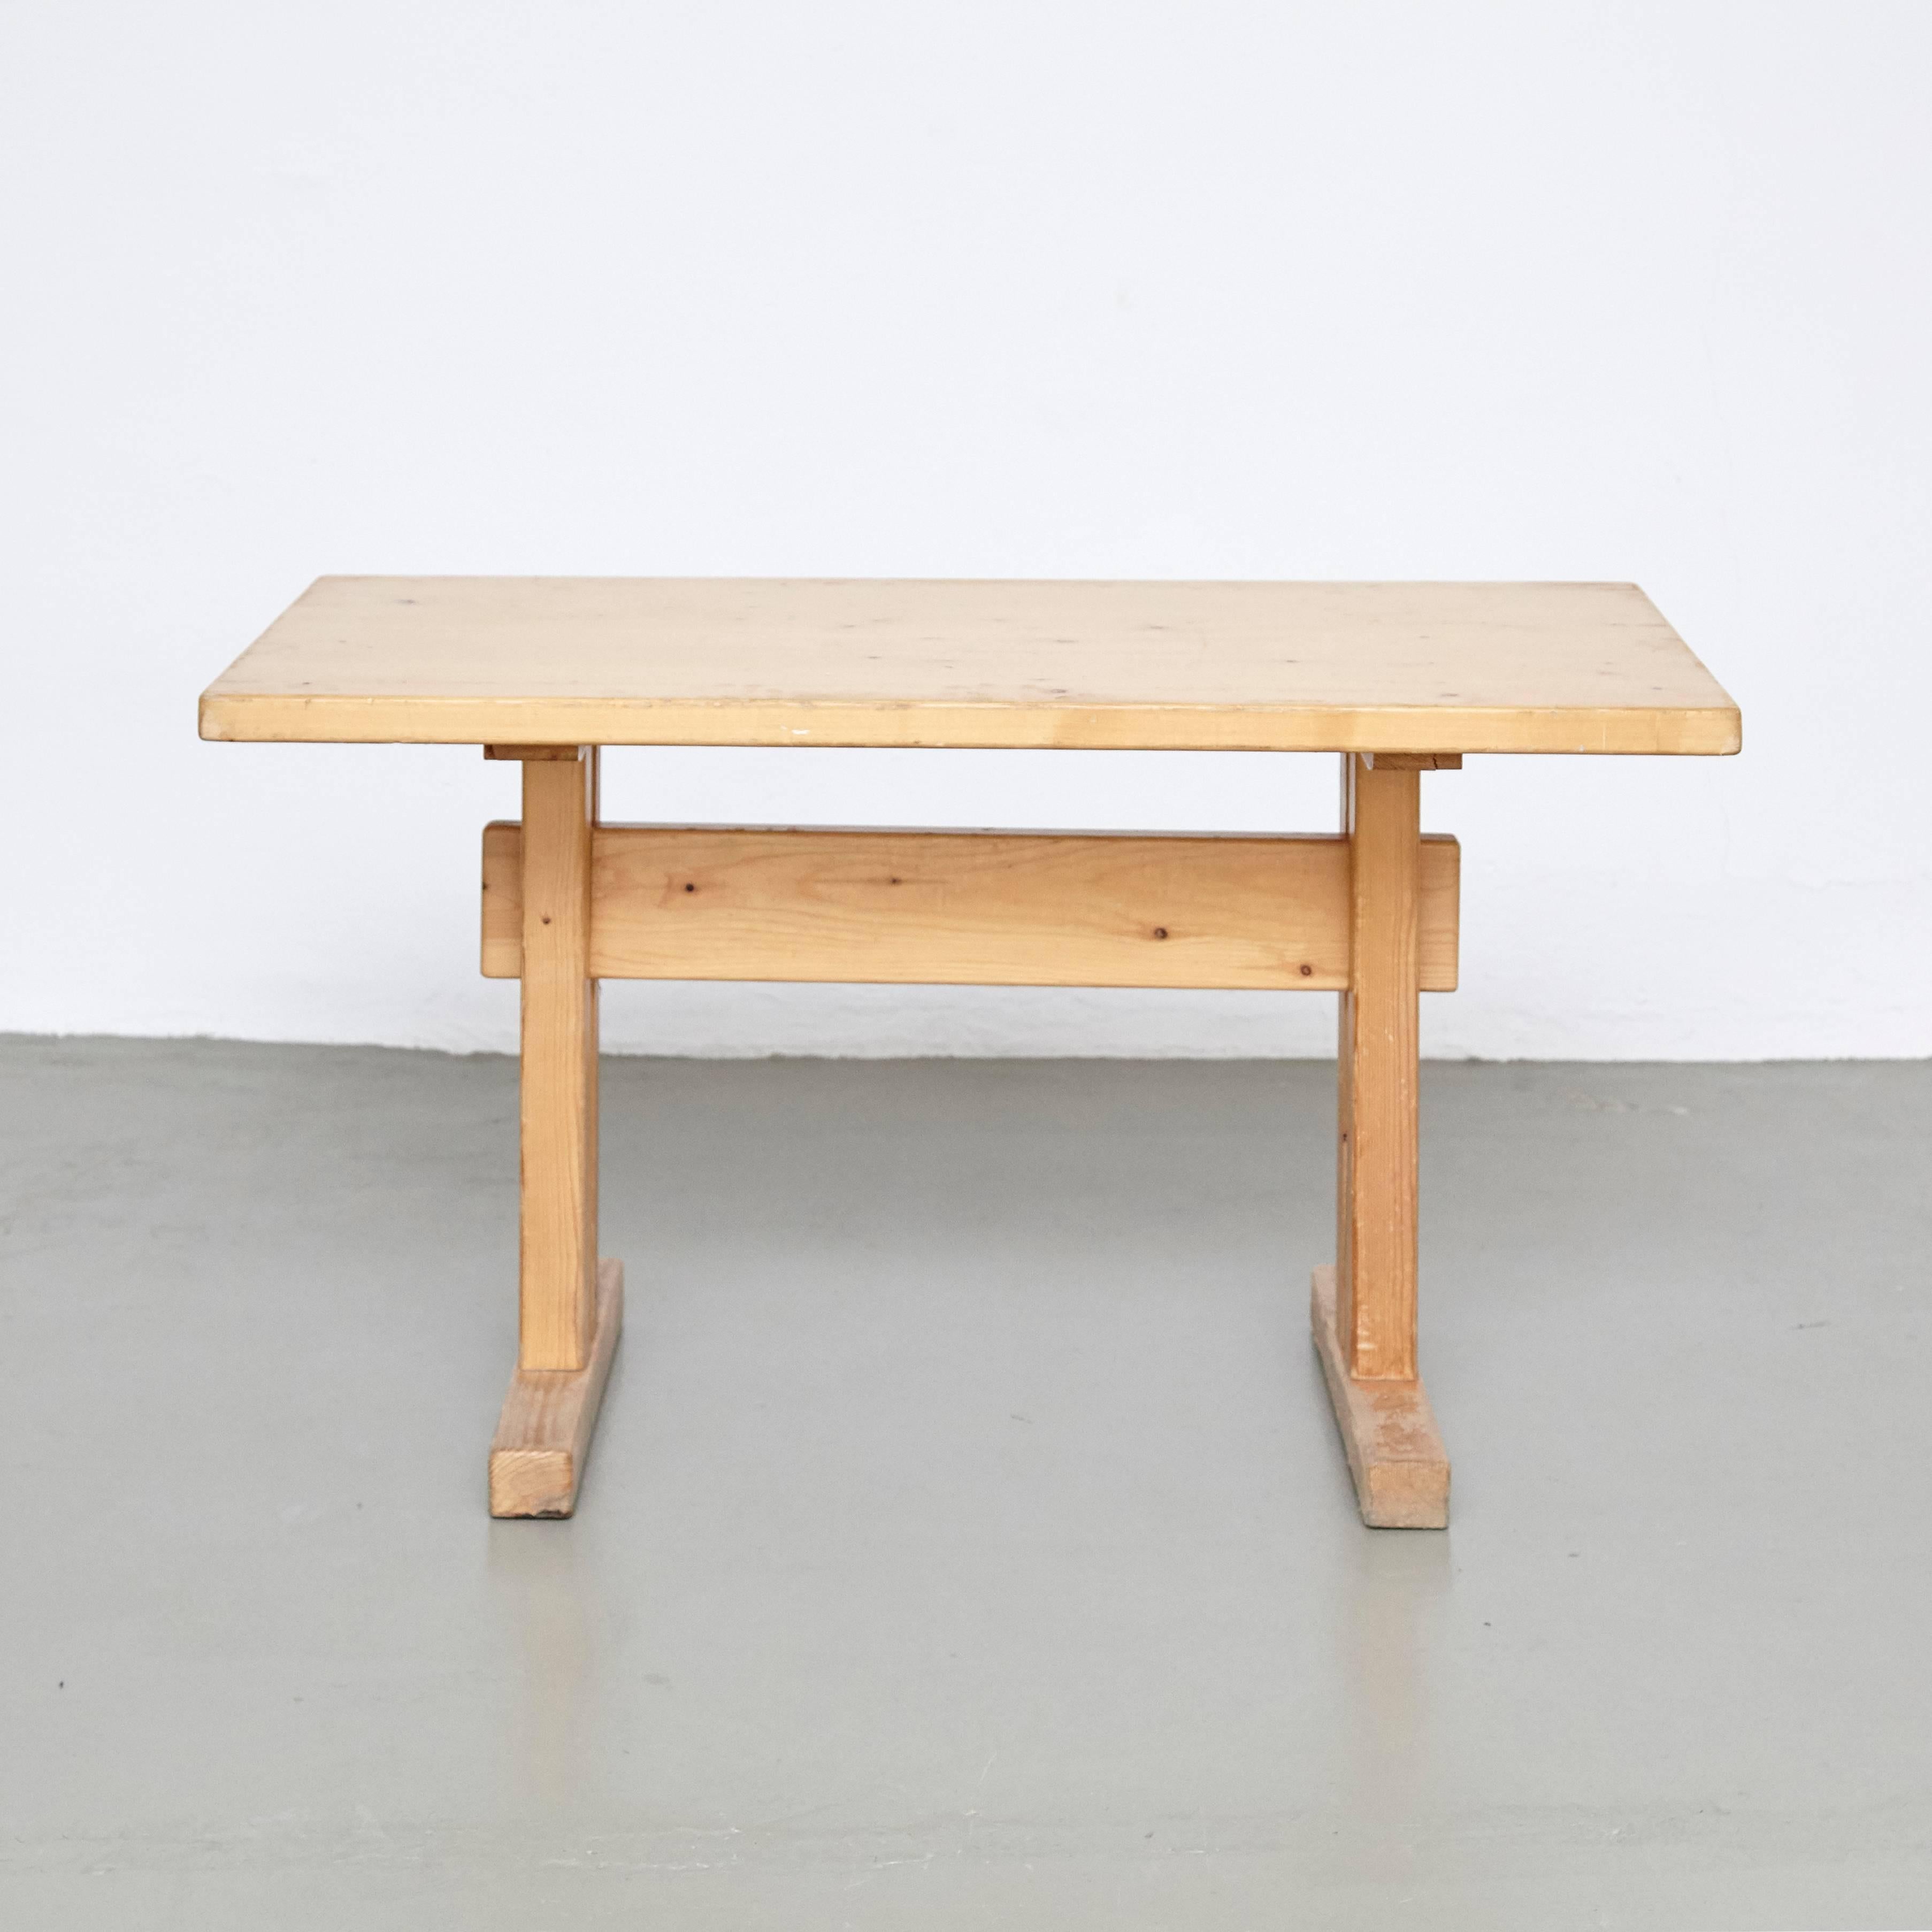 Pine Charlotte Perriand Big Table and Four Stools for Les Arcs